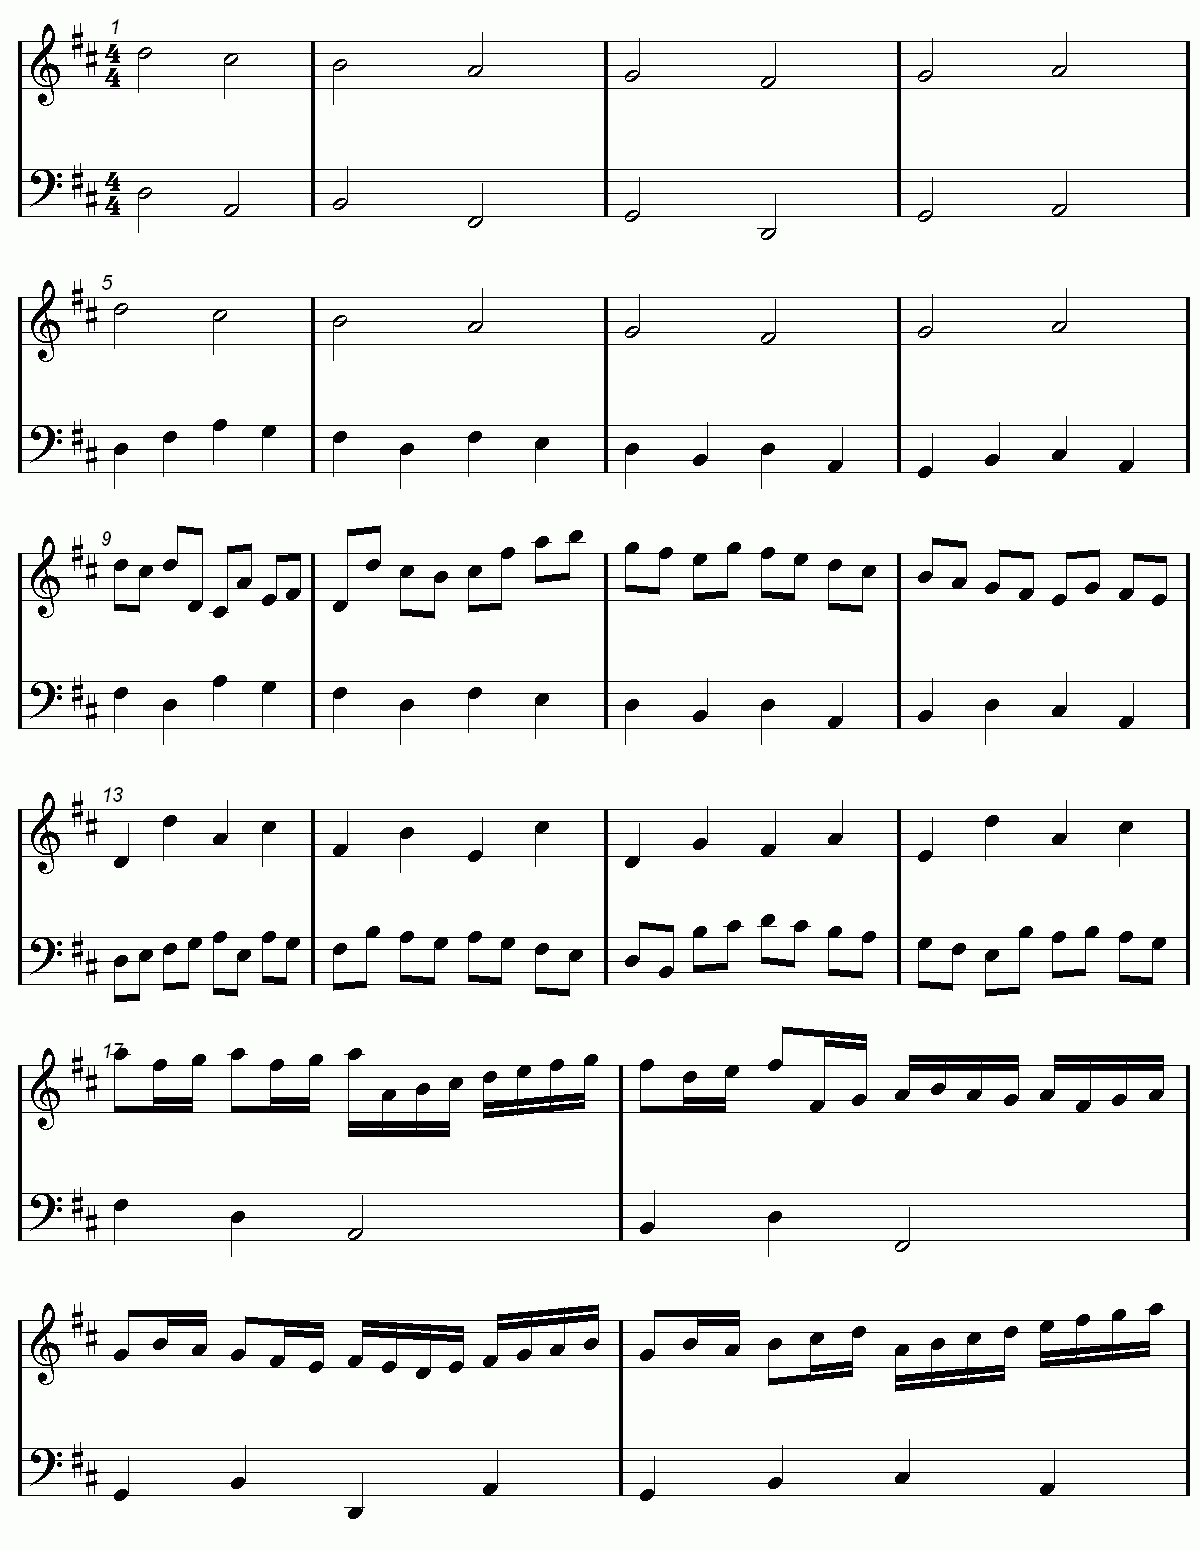 Canon In D Major Easy Piano Sheet Music | Easy Music for Canon In D Piano Sheet Music Free Printable